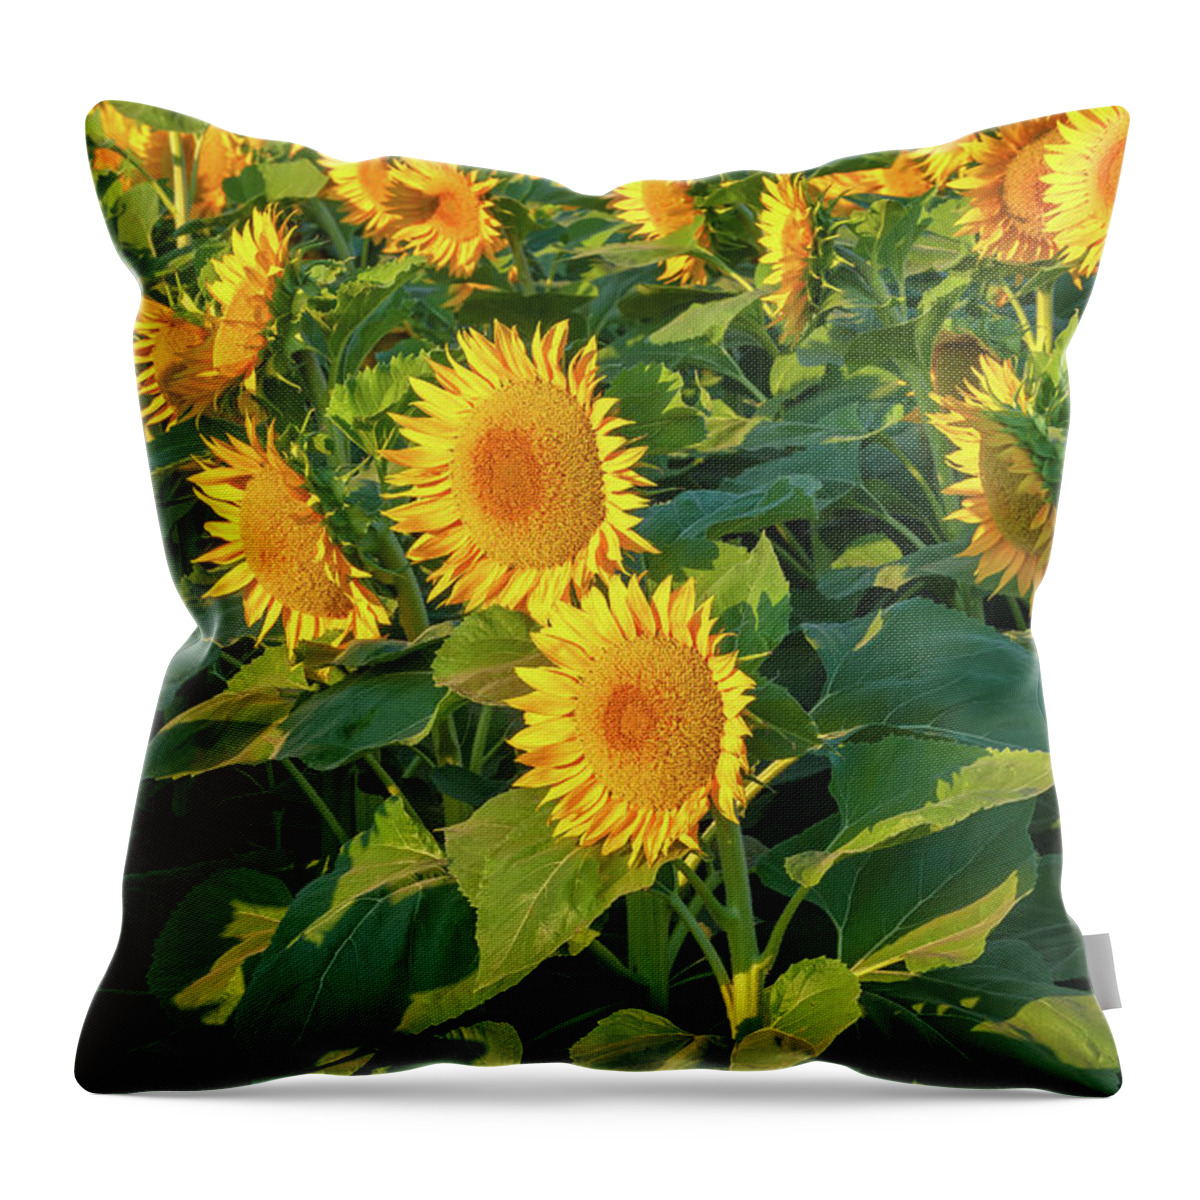 Flower Throw Pillow featuring the photograph Sunflowers by Jonathan Nguyen